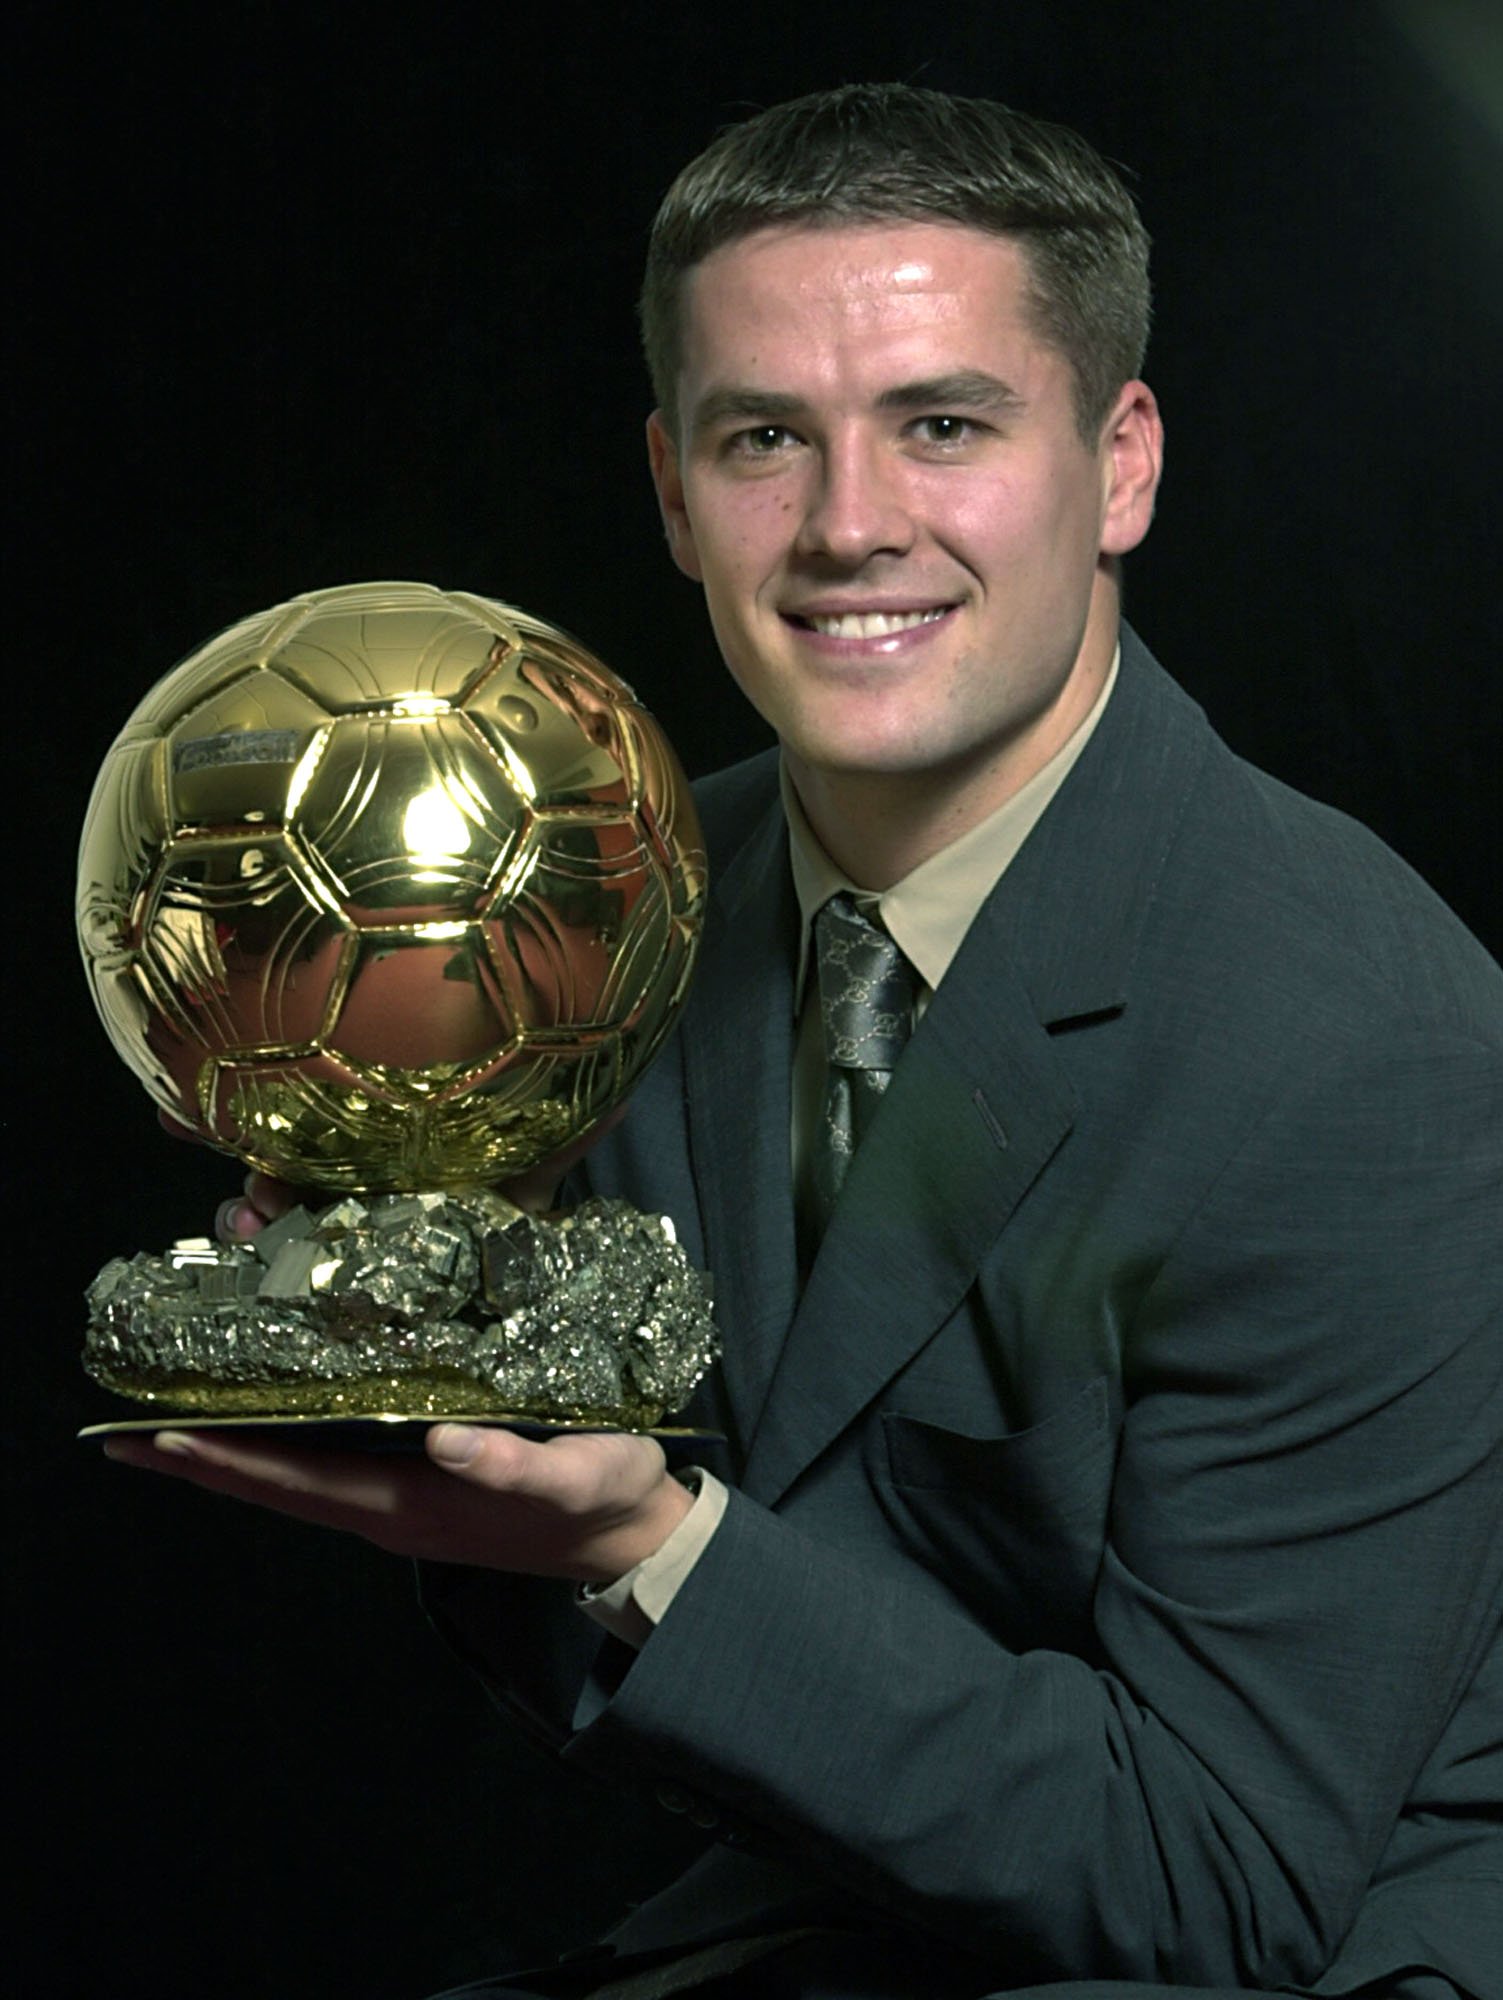 Michael Owen took home the award in 2001